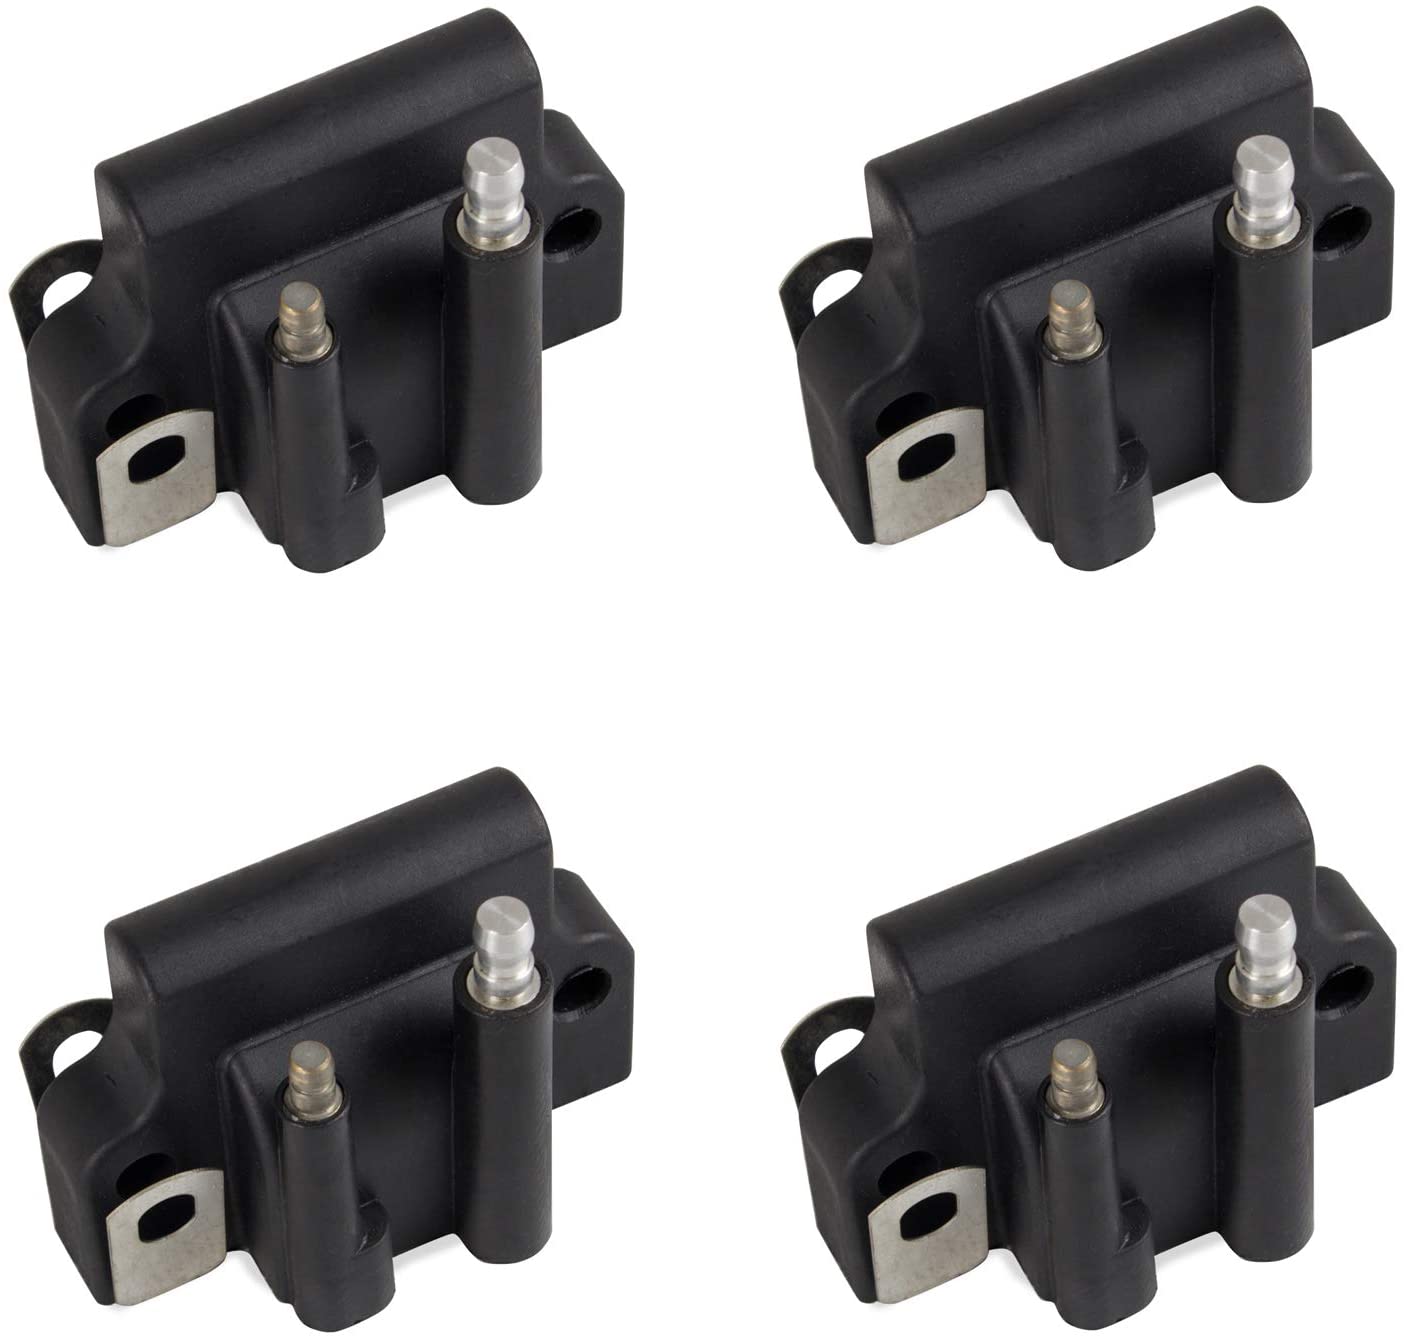 Tepeng 4 Pcs Ignition Coils compatible with Johnson Evinrude 4-300HP,Replace Part# 582508 18-5179 183-2508 (4 Pieces) (4 Pieces)